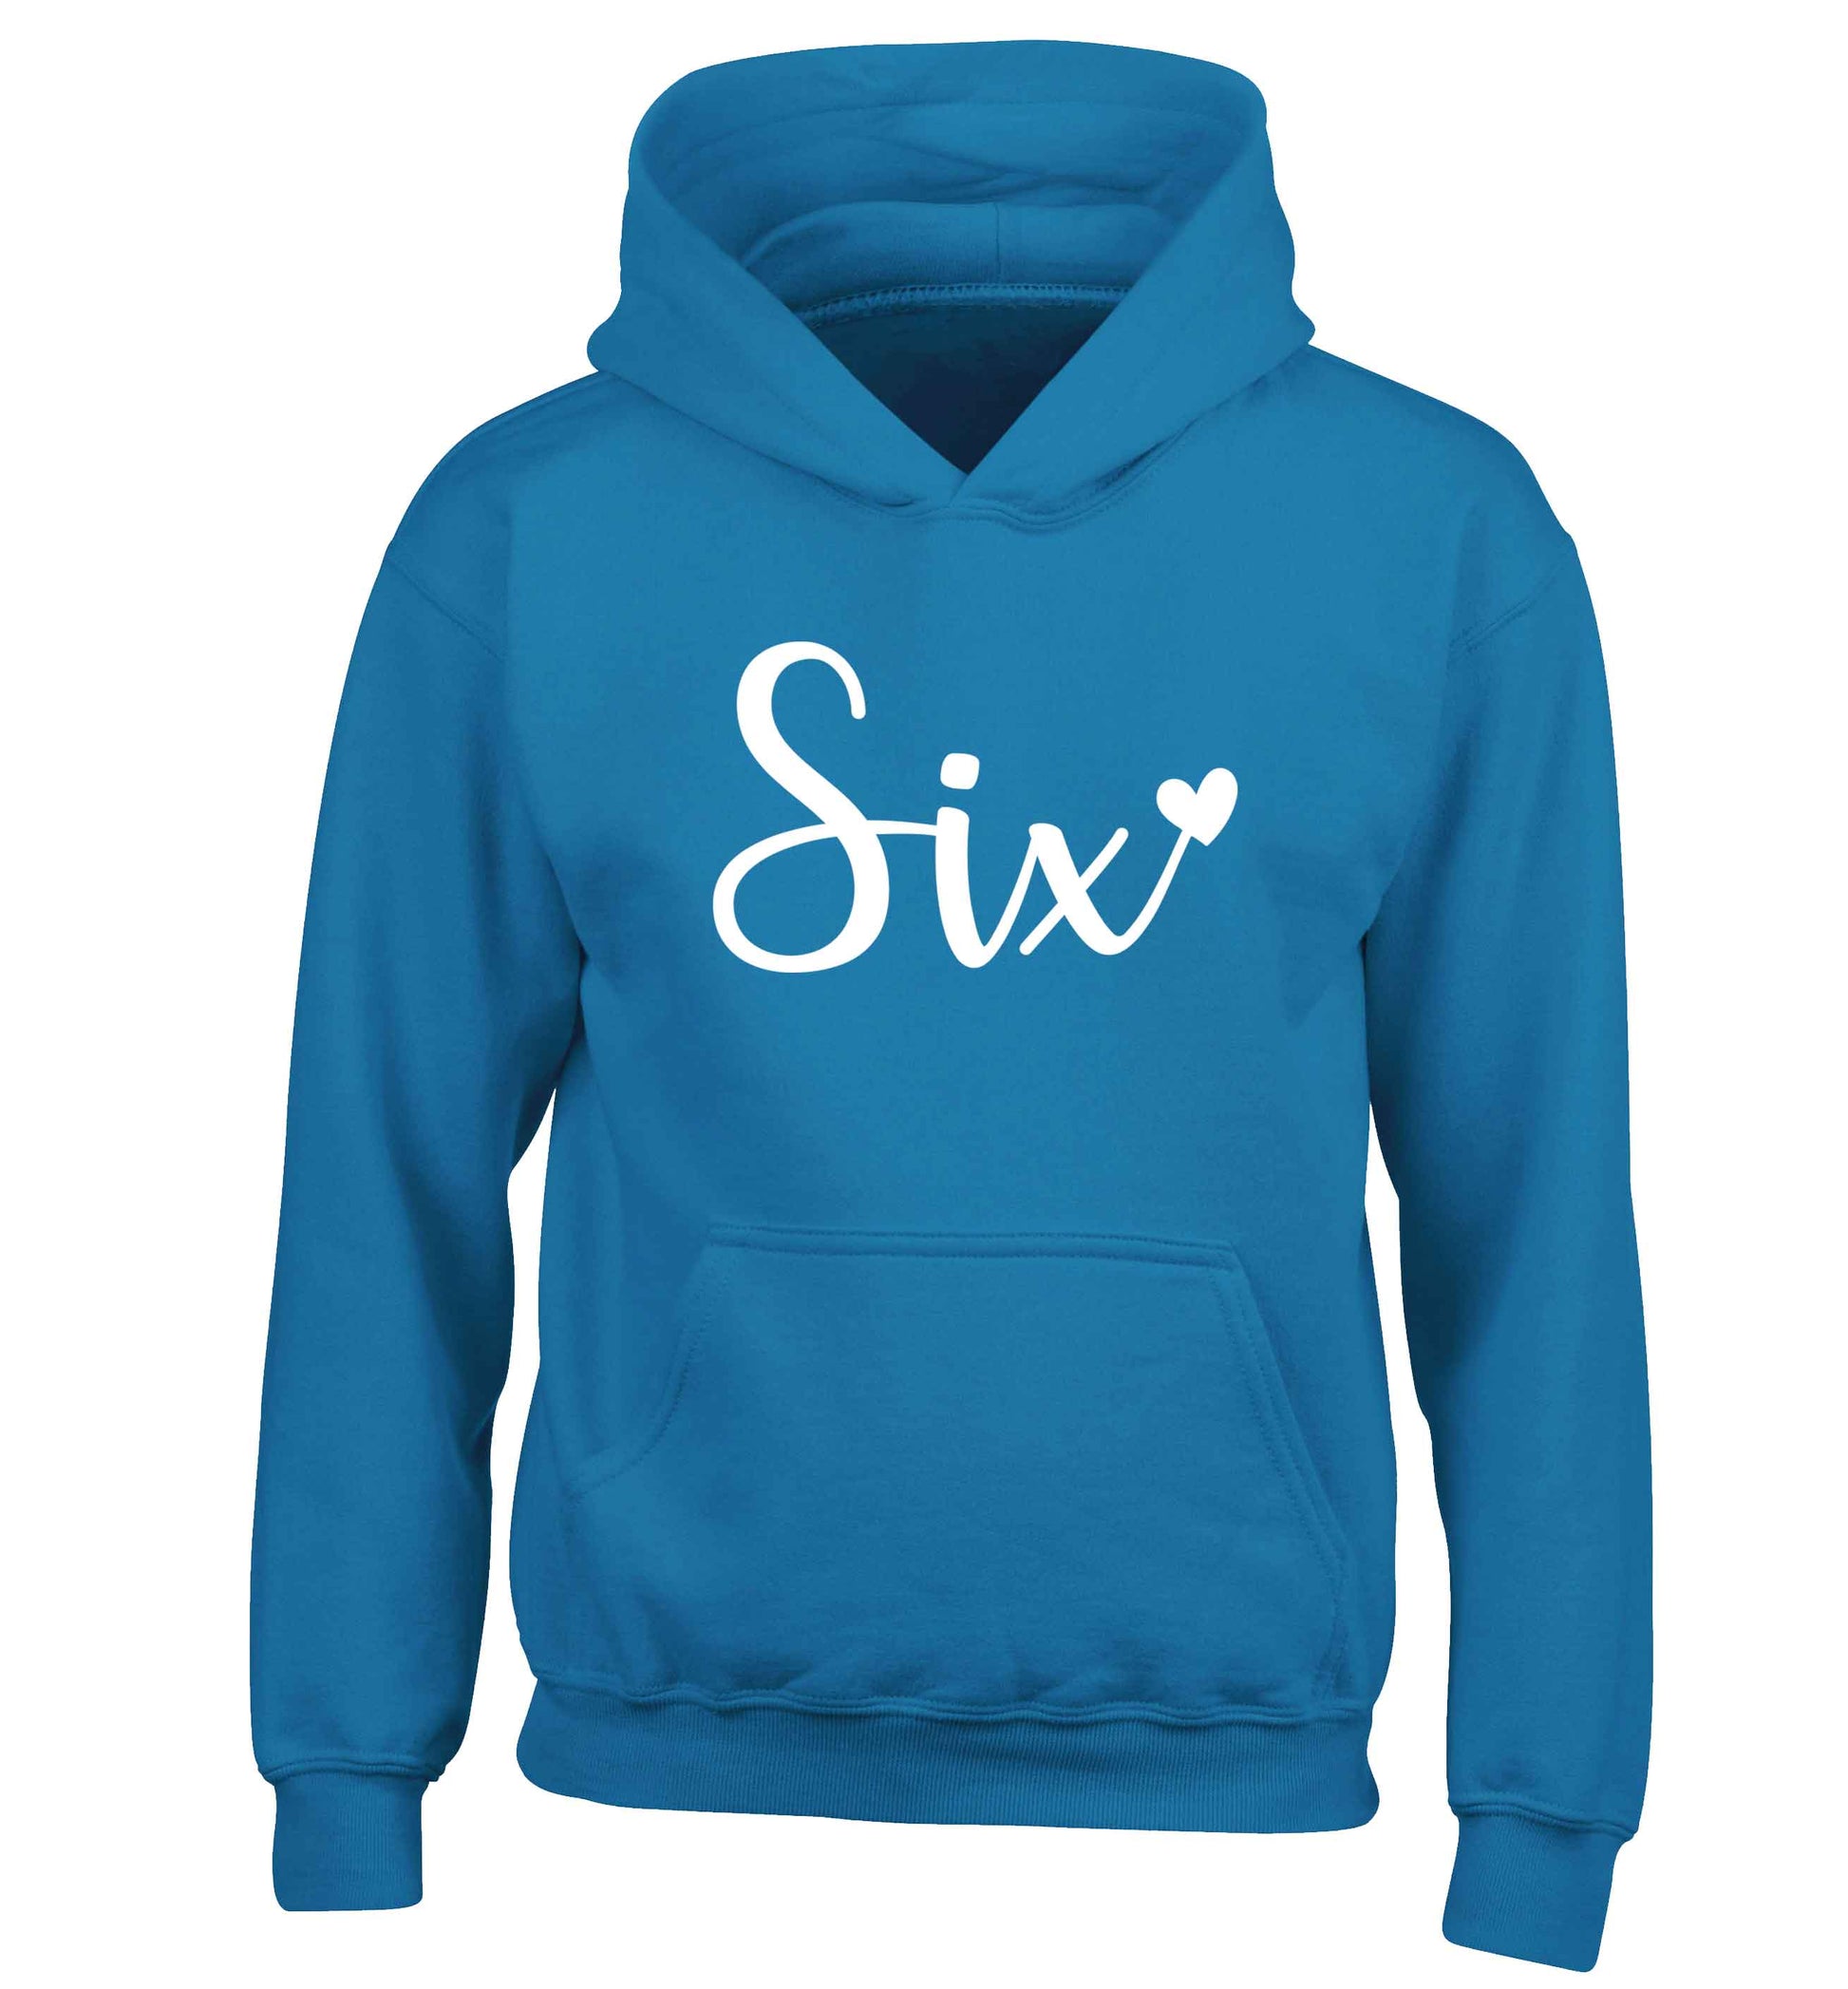 Six and heart! children's blue hoodie 12-13 Years